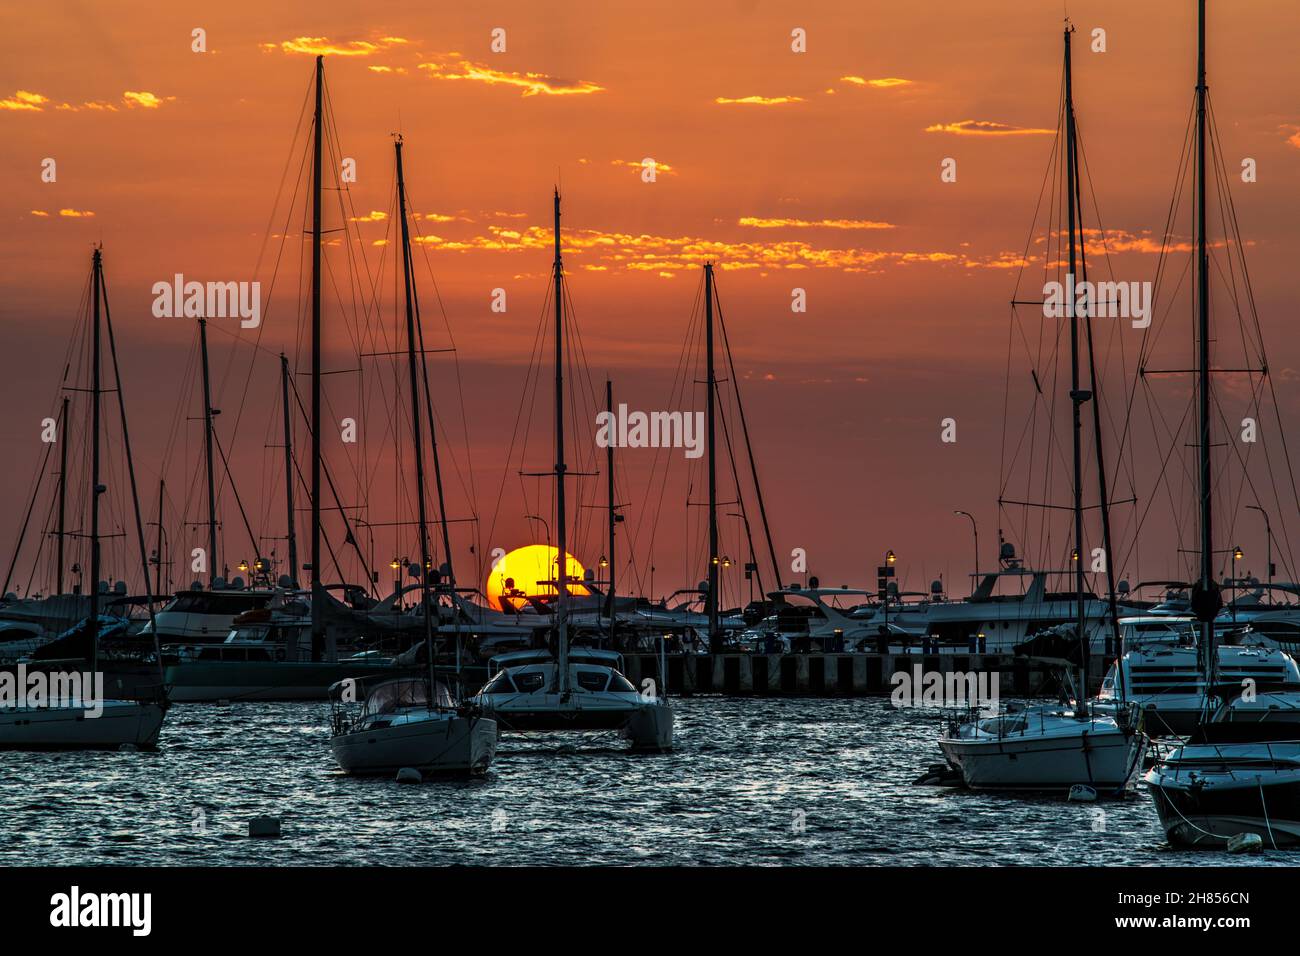 Sunset, boats and a beautiful view of Punta Del Este Uruguay. Stock Photo